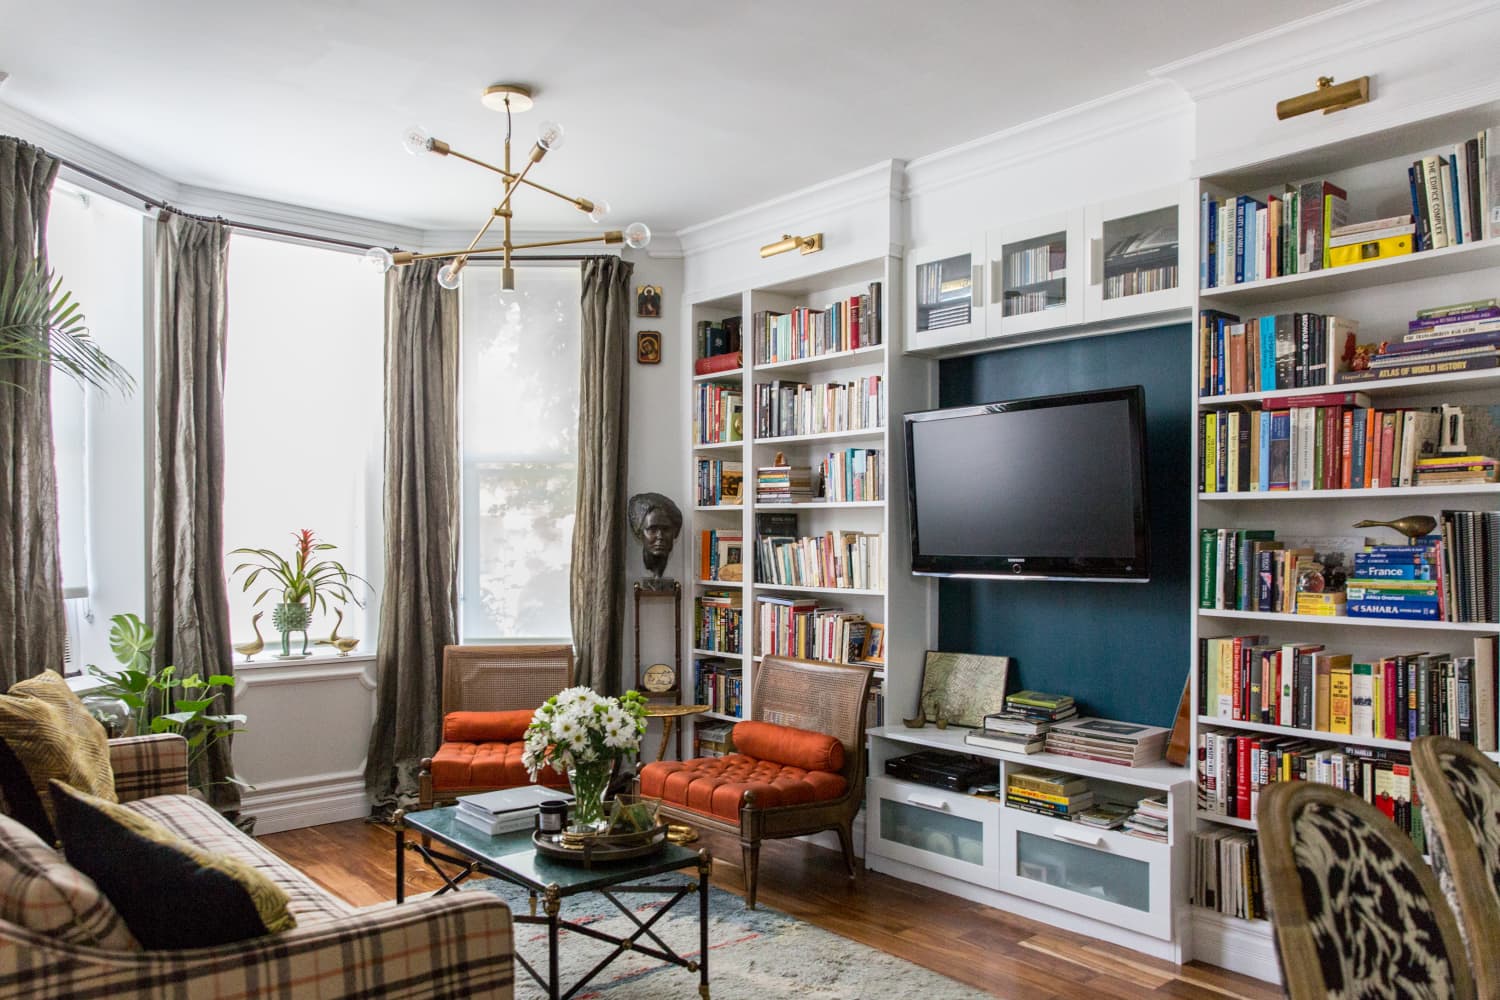 The Best Living Room Trends for 2020, According to Real Estate Experts